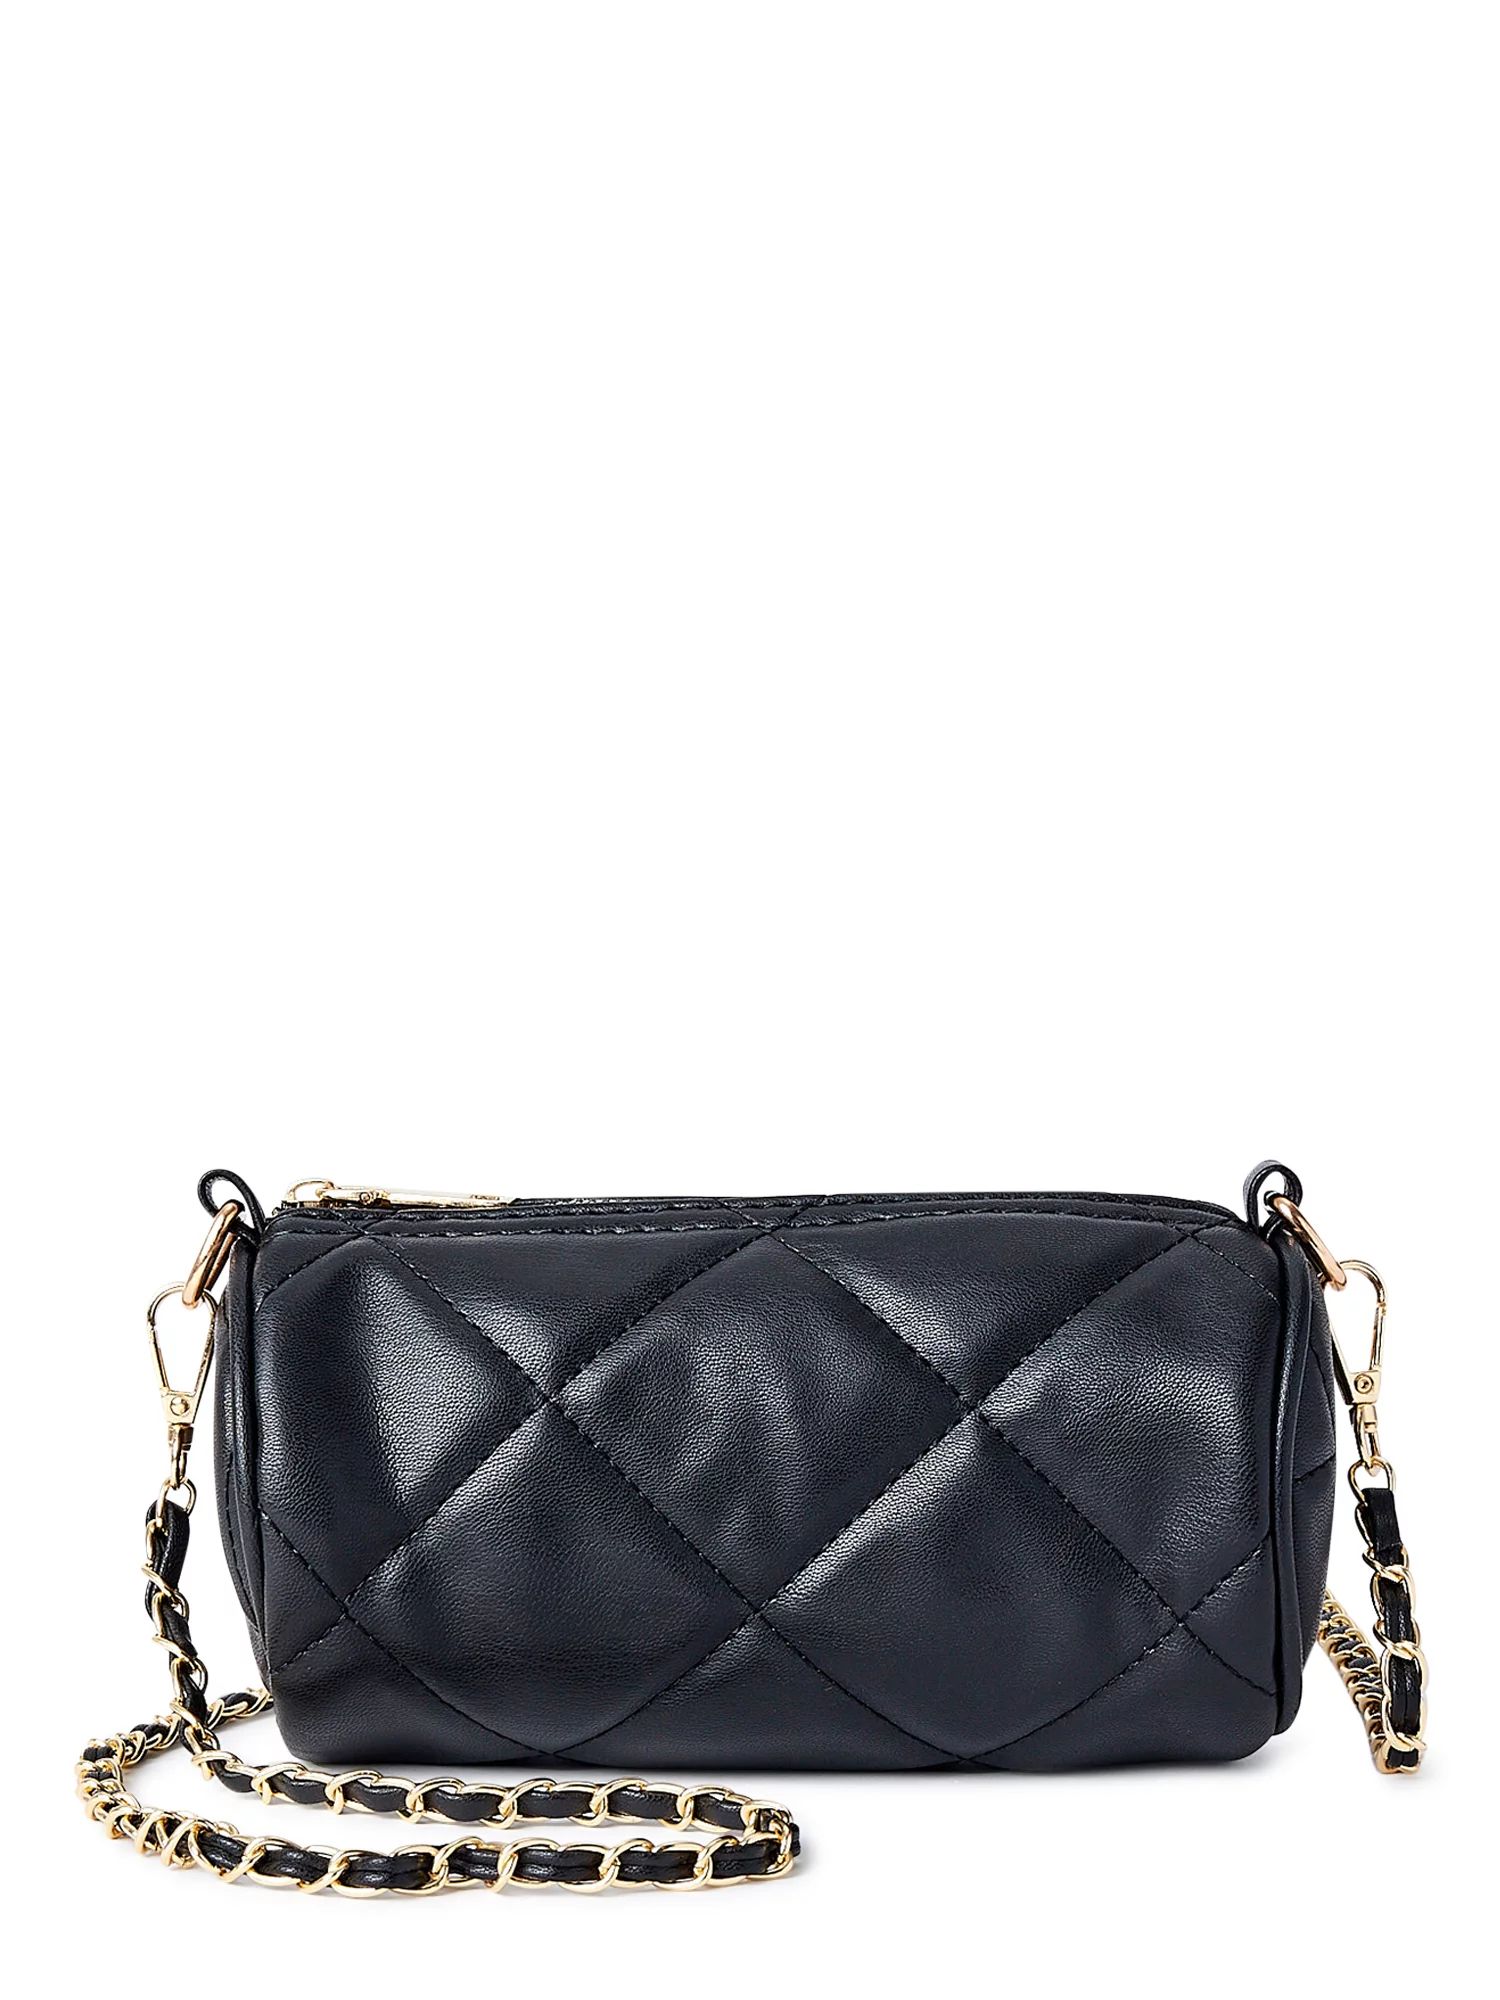 Jane & Berry Women's Small Quilted Faux Leather Barrel Bag with Gold-Tone Chain Strap, Black | Walmart (US)